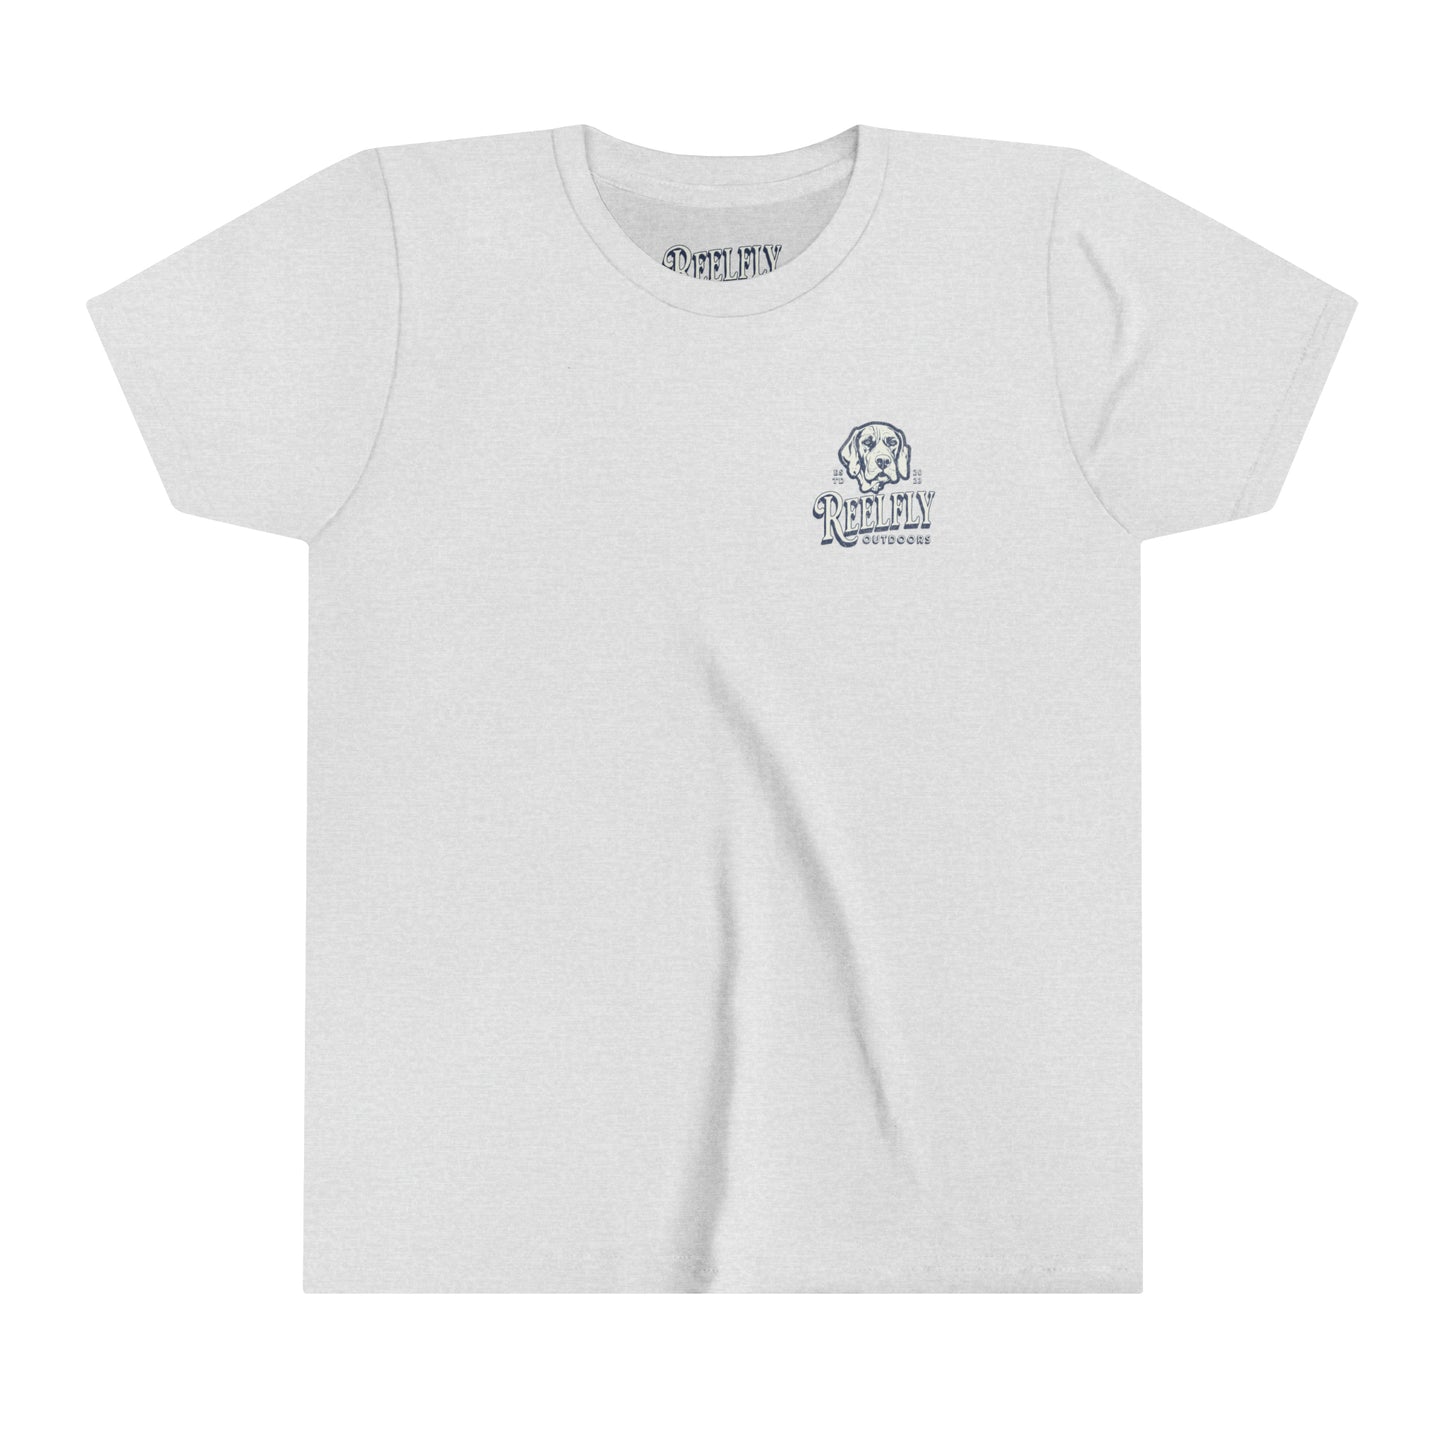 Reelfly Signature Tee (Youth)